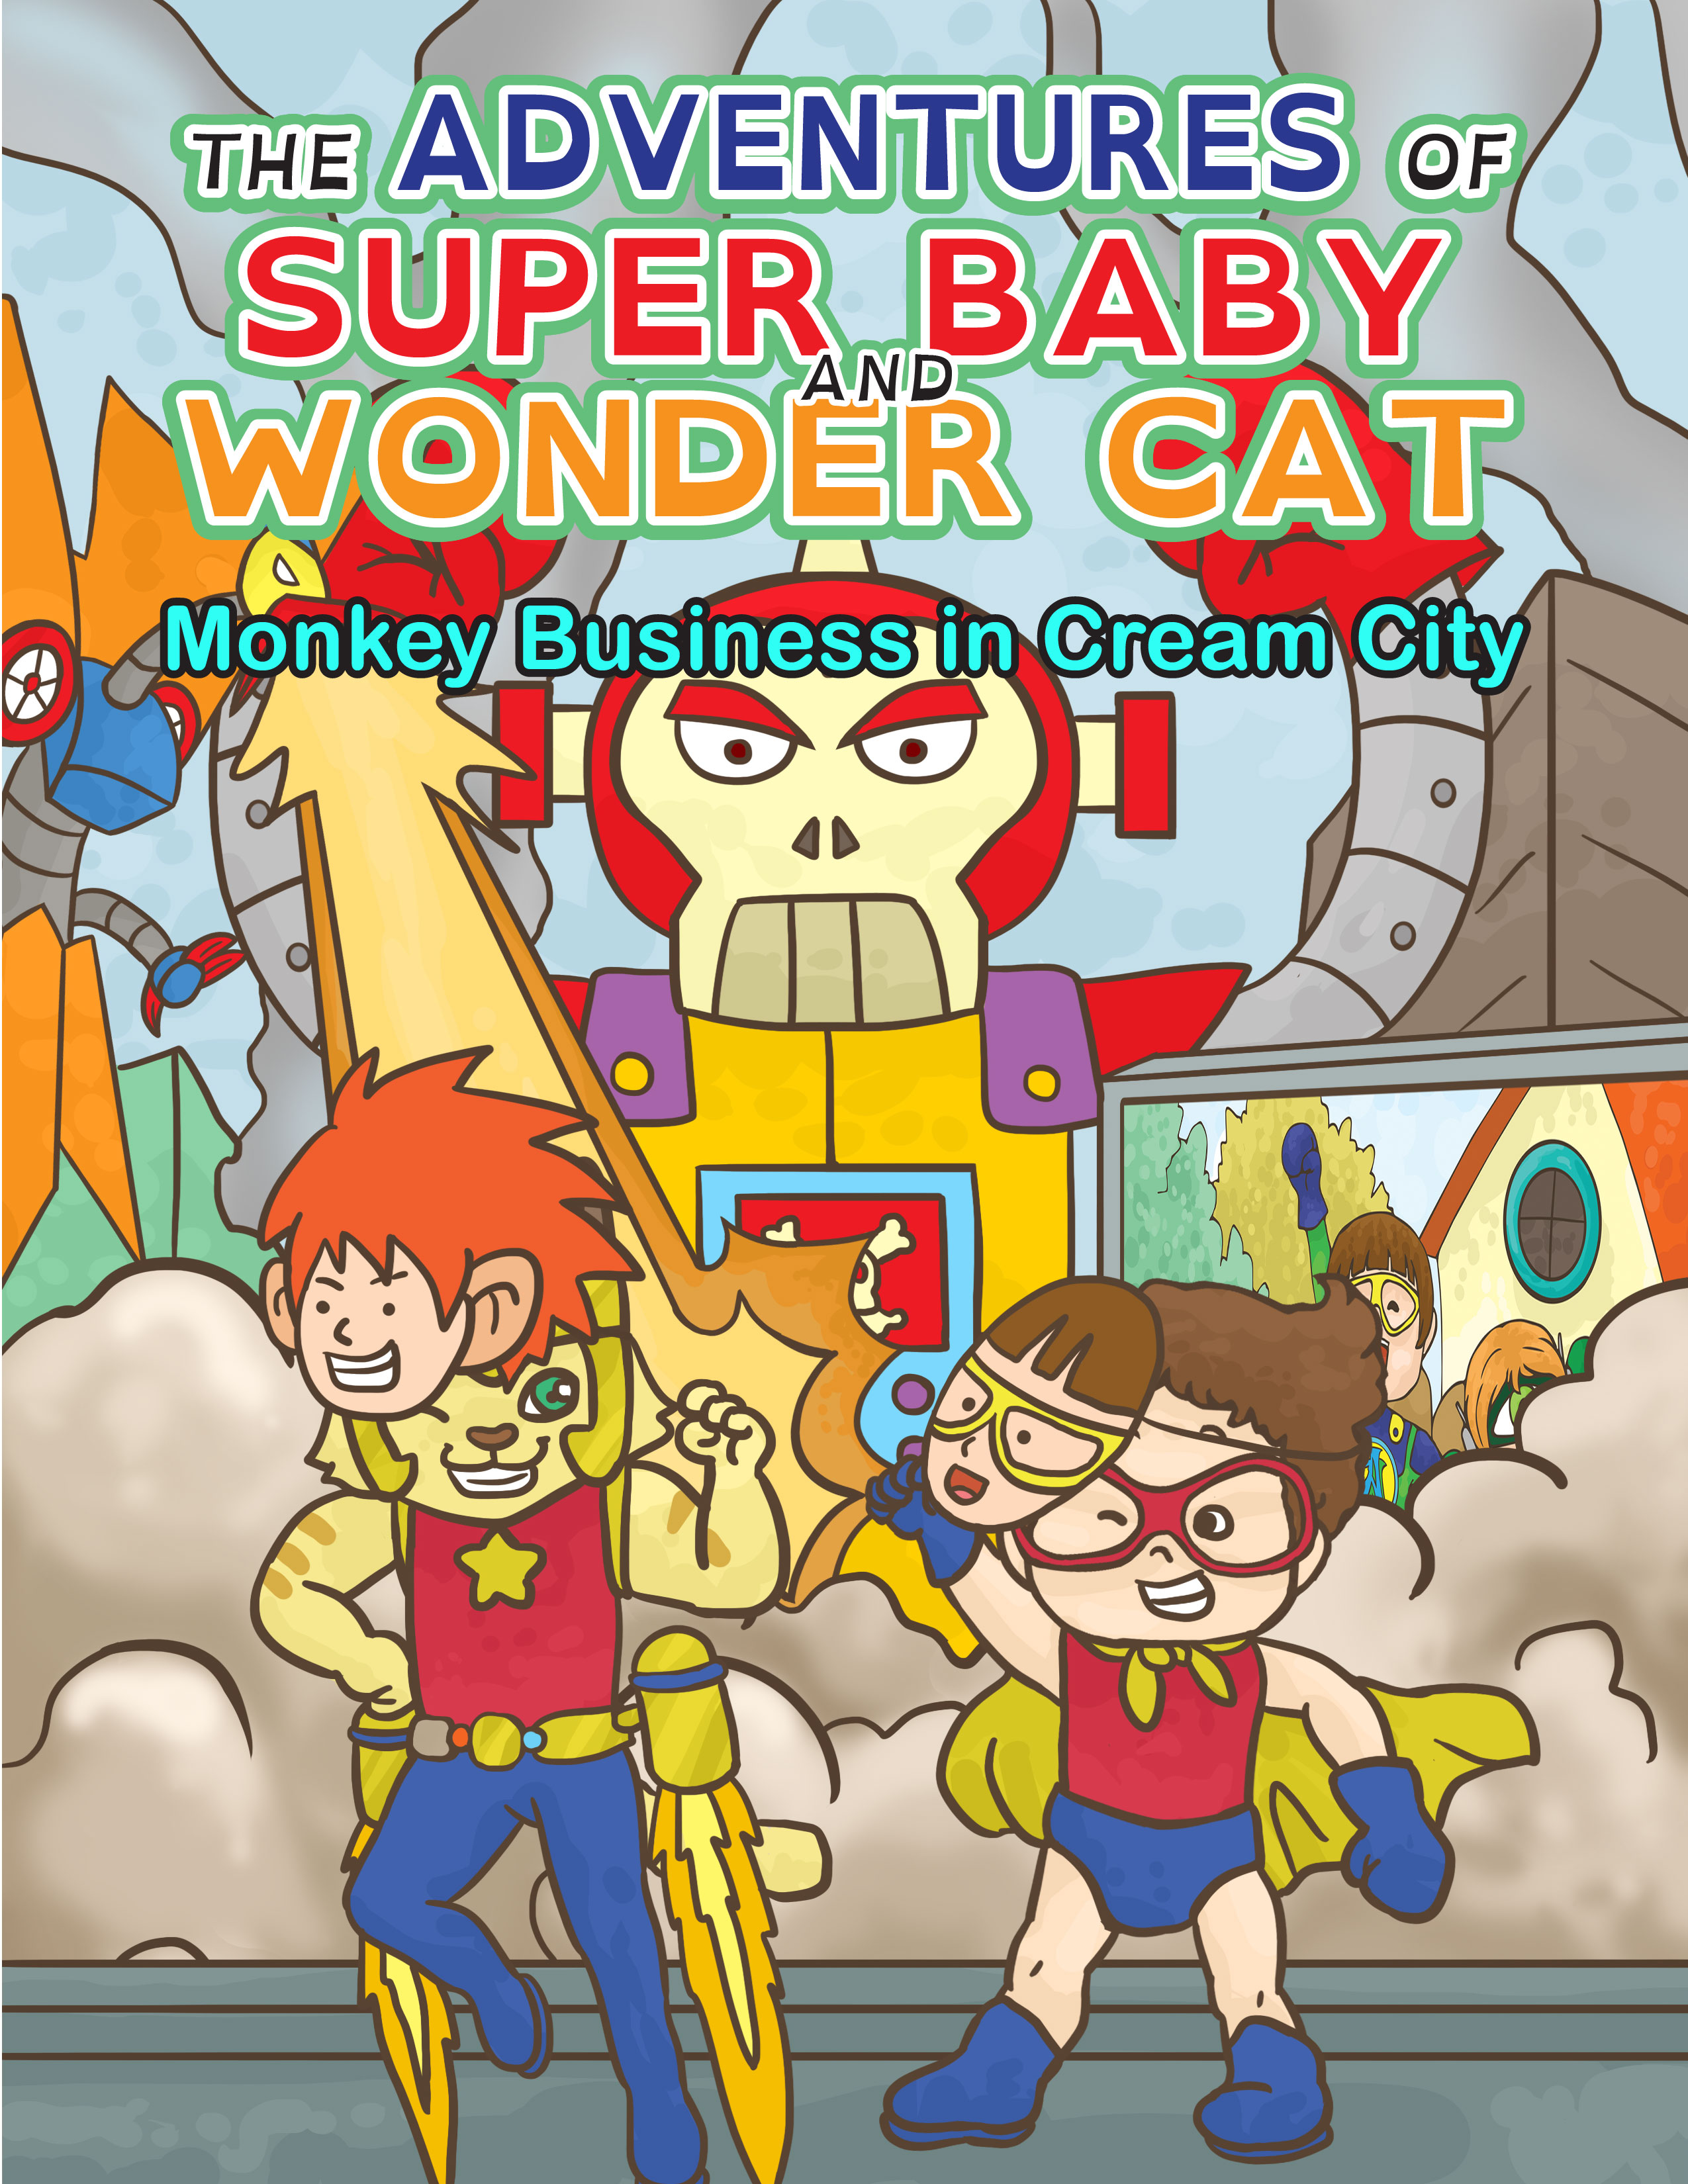 The Adventures of Super Baby: Monkey Business in Cream City